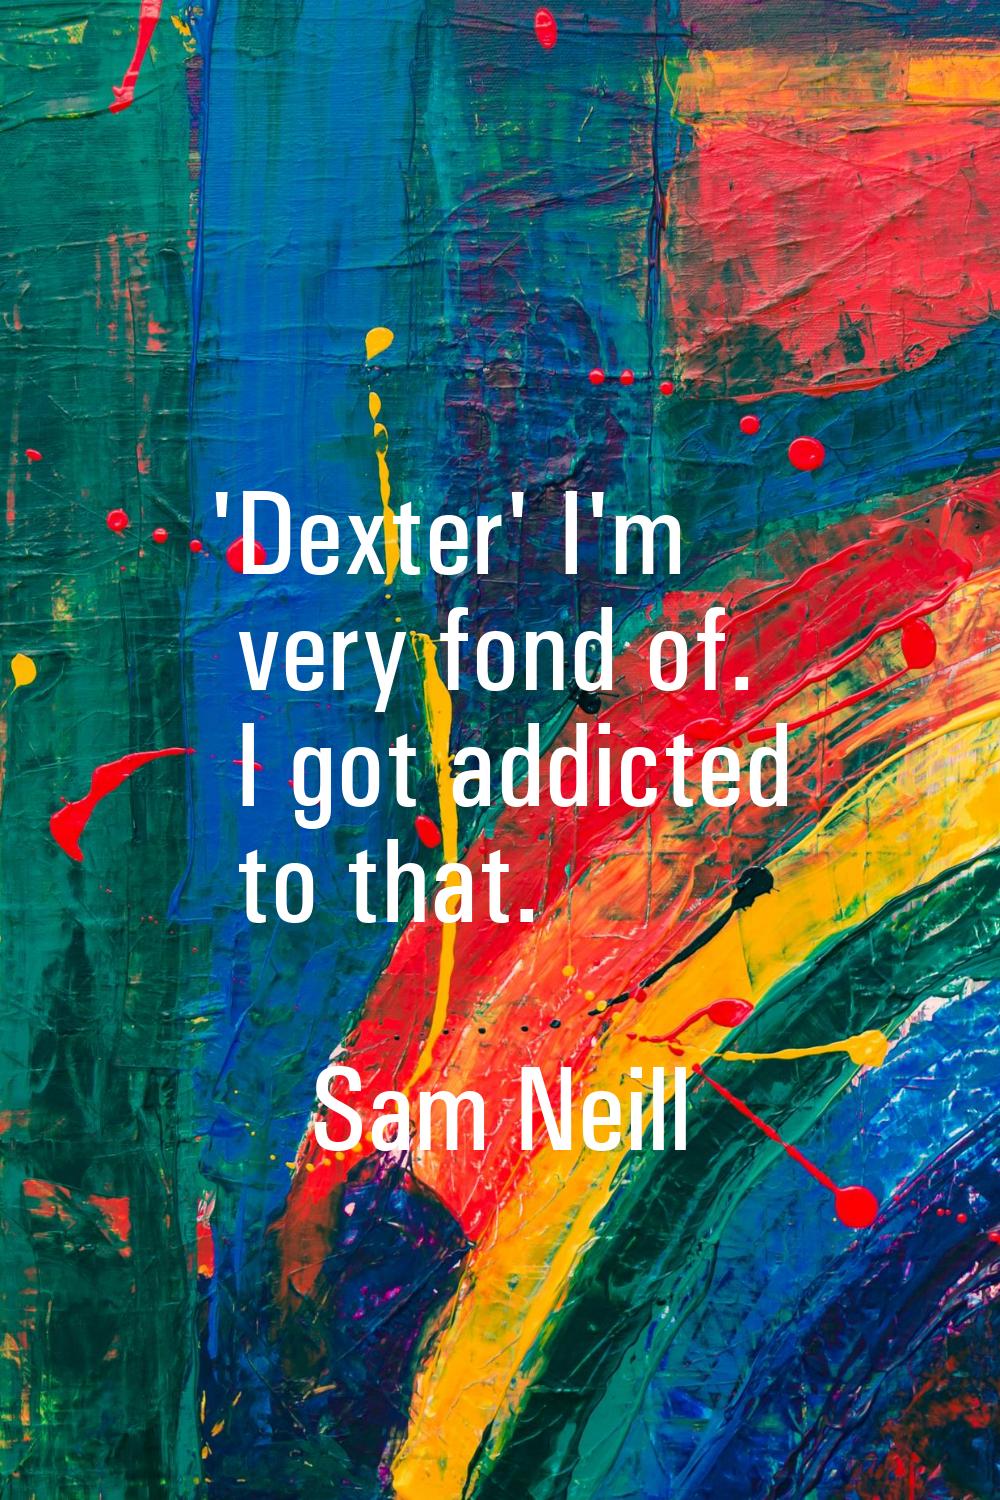 'Dexter' I'm very fond of. I got addicted to that.